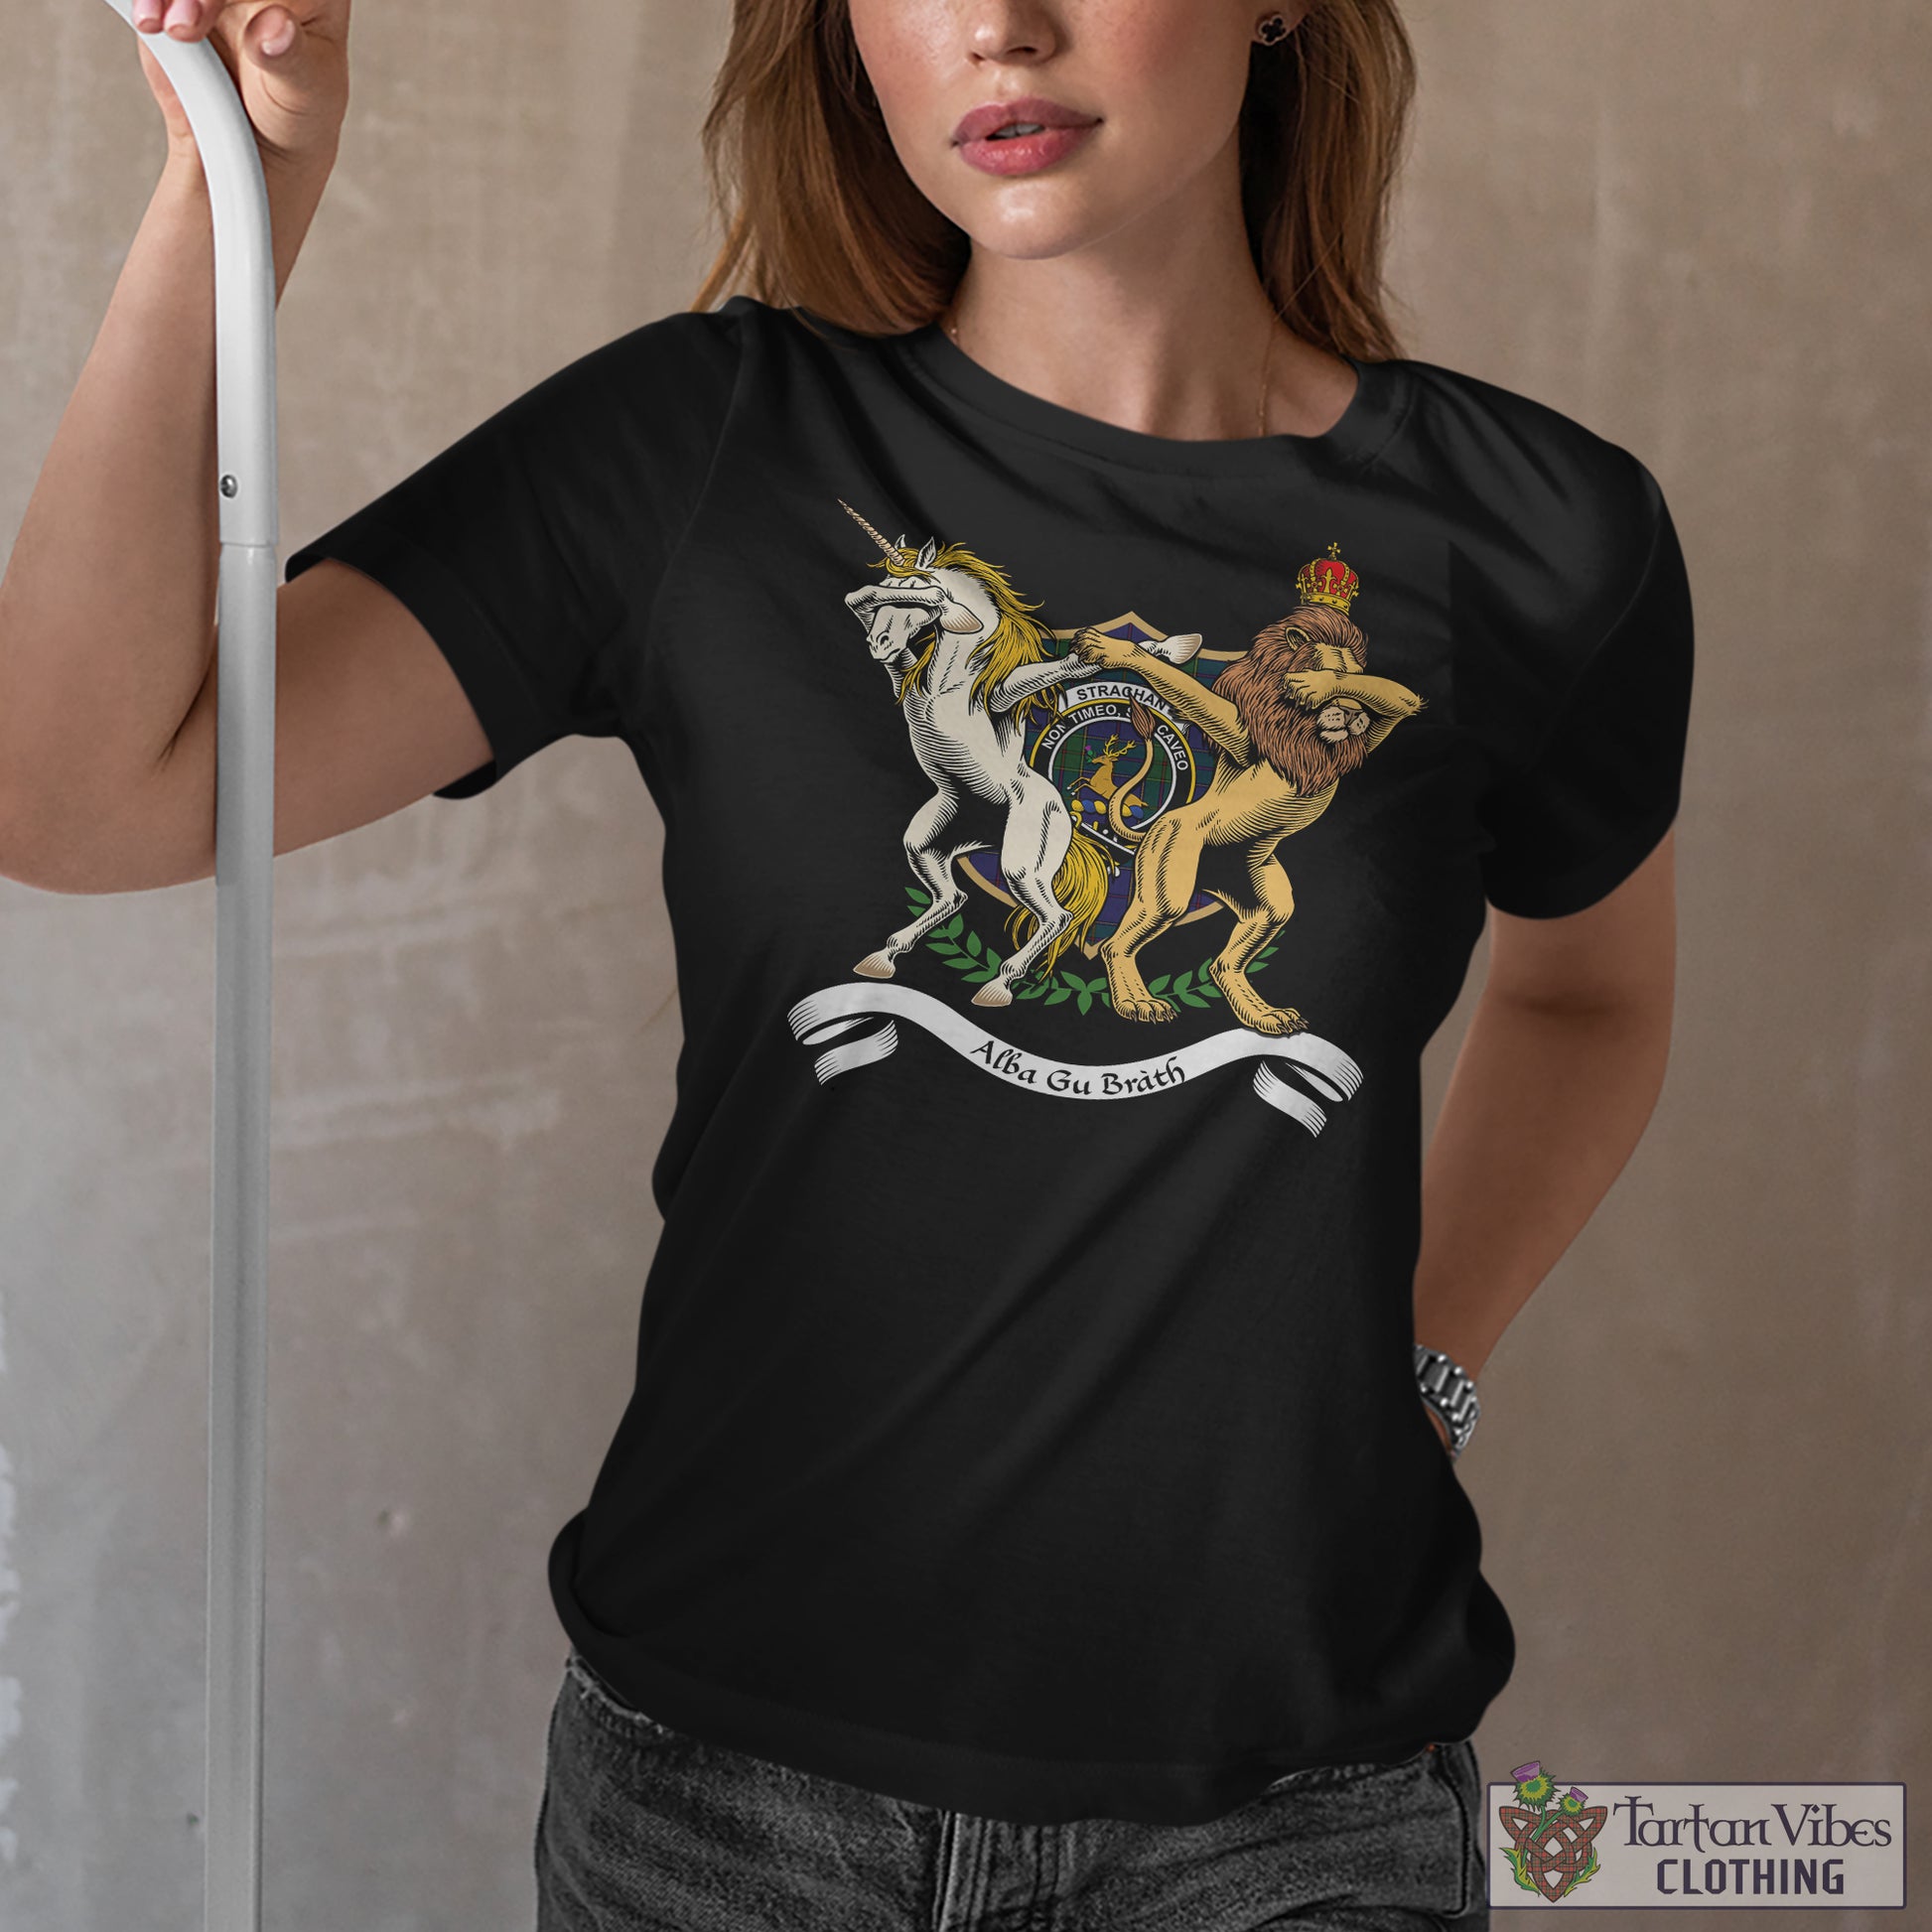 Tartan Vibes Clothing Strachan Family Crest Cotton Women's T-Shirt with Scotland Royal Coat Of Arm Funny Style